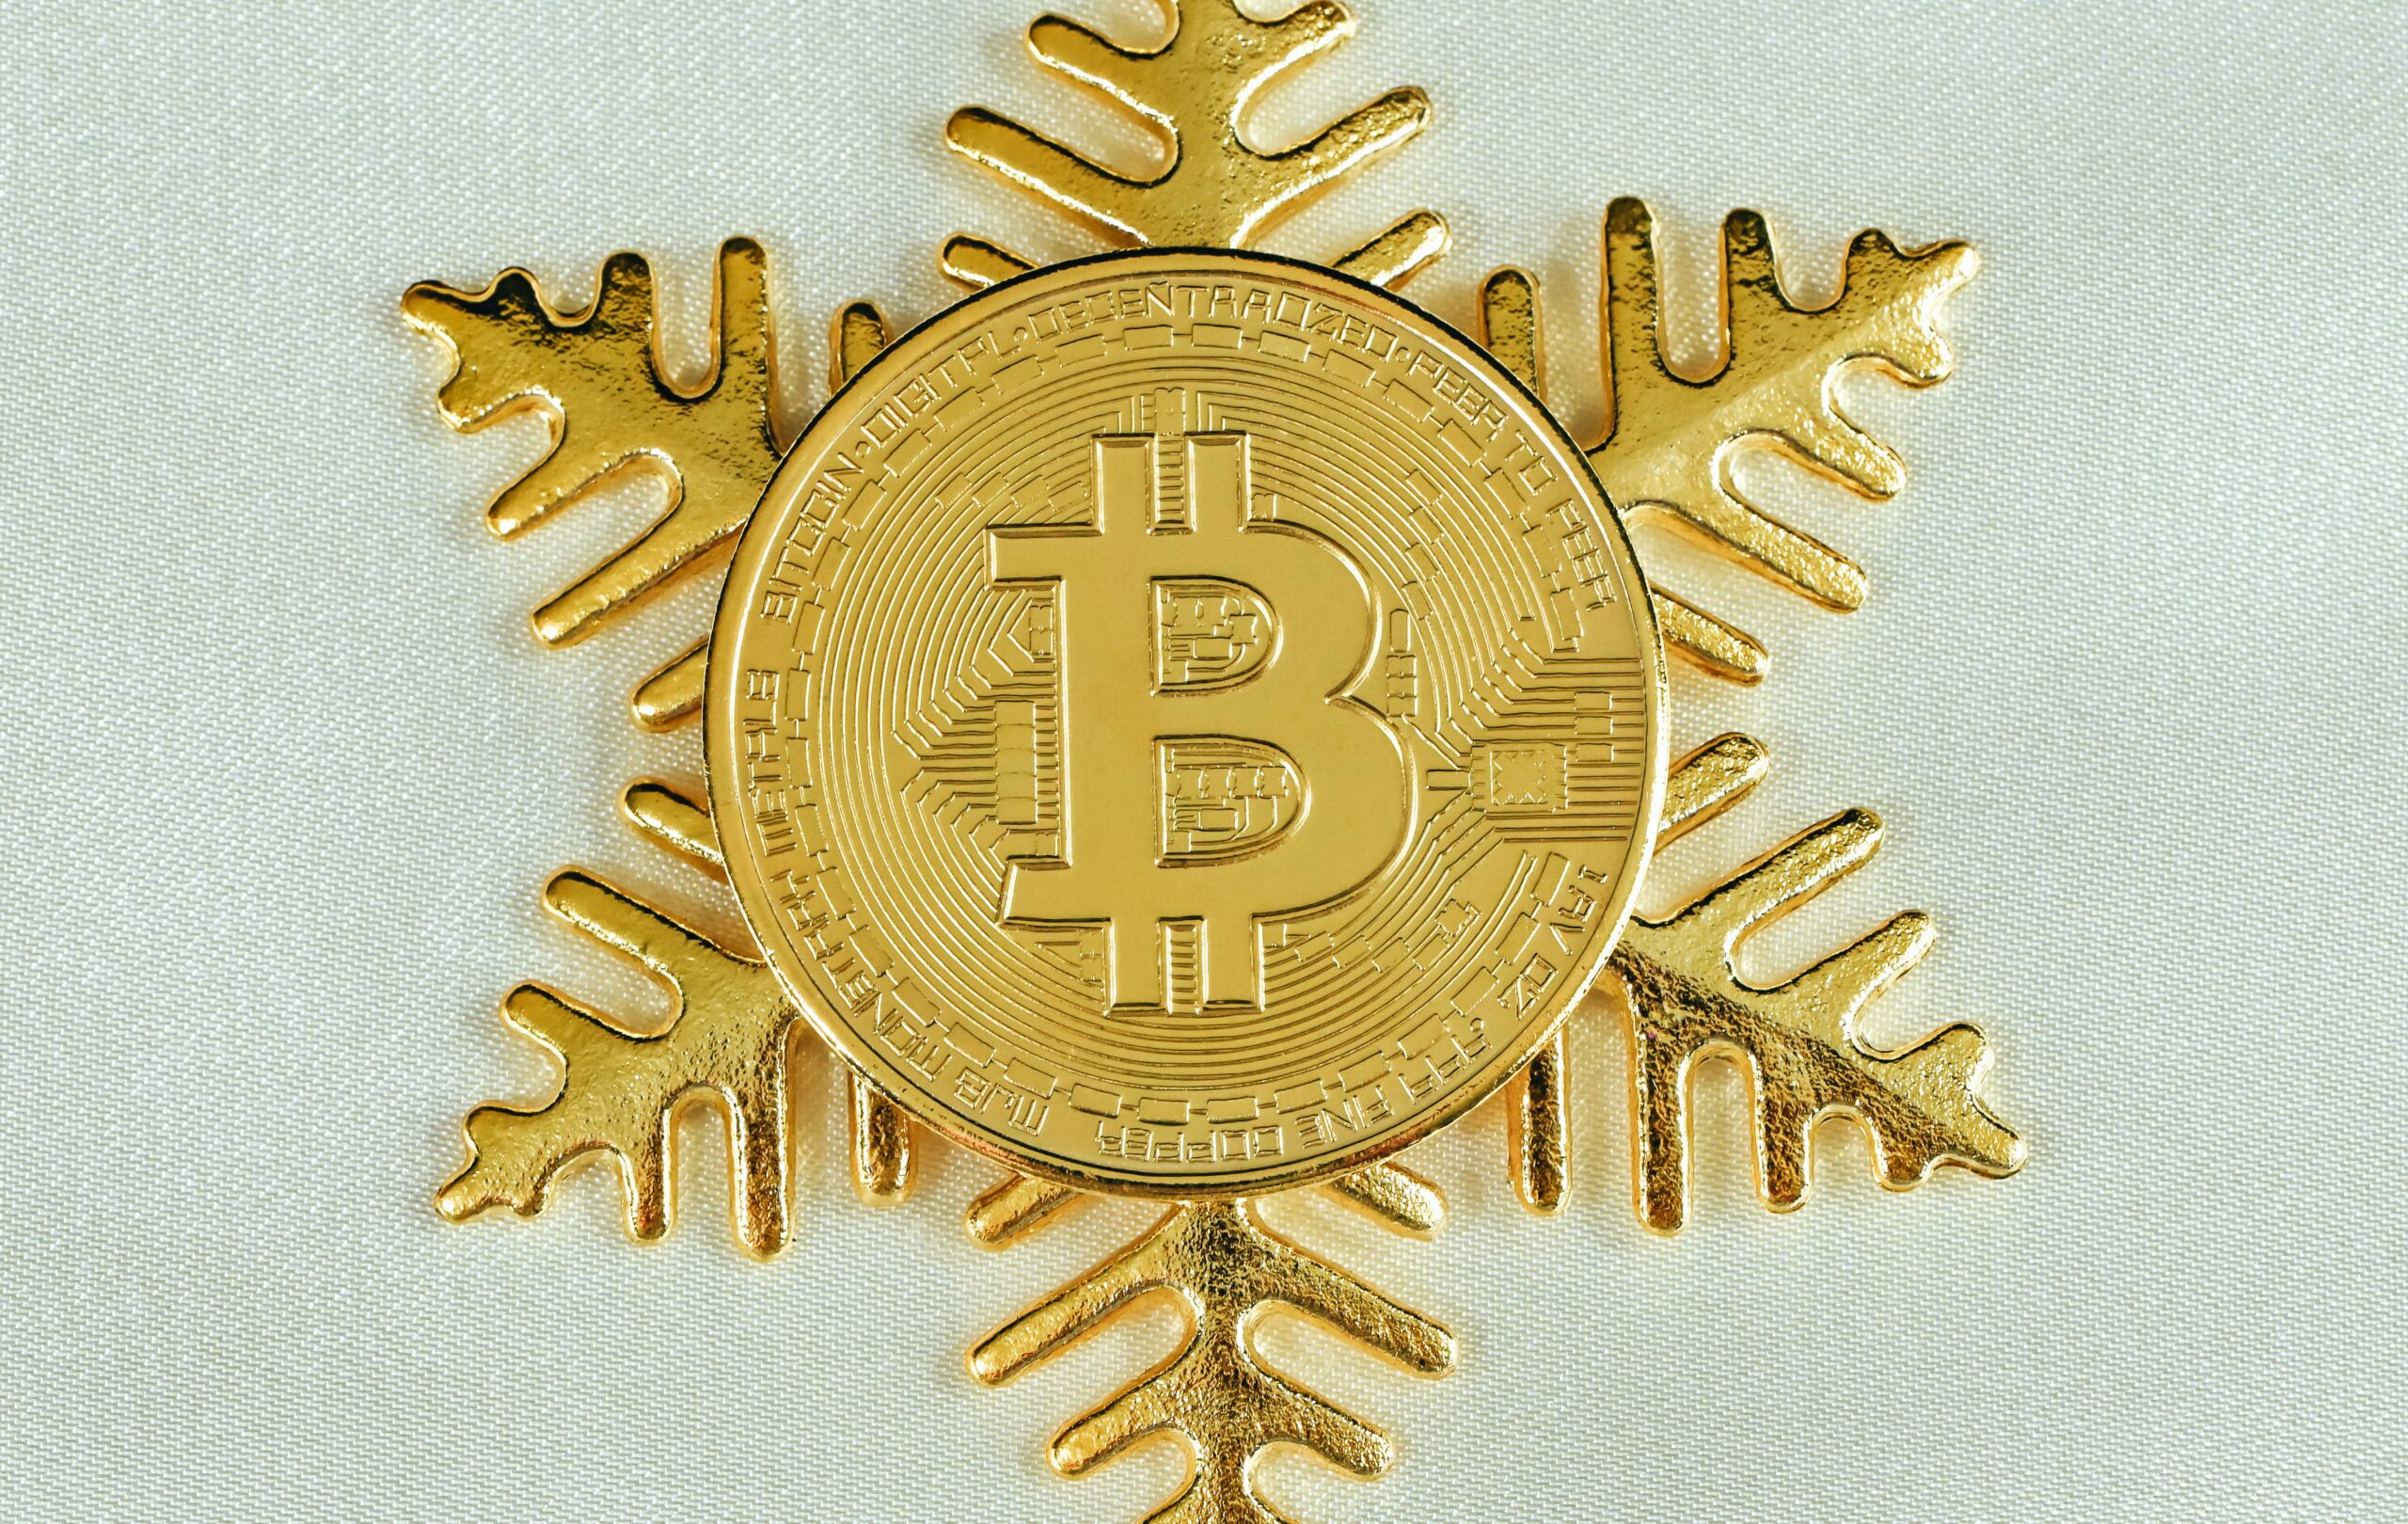 The bitcoin Christmas rally primarily revolves around the months of December until mid-January.